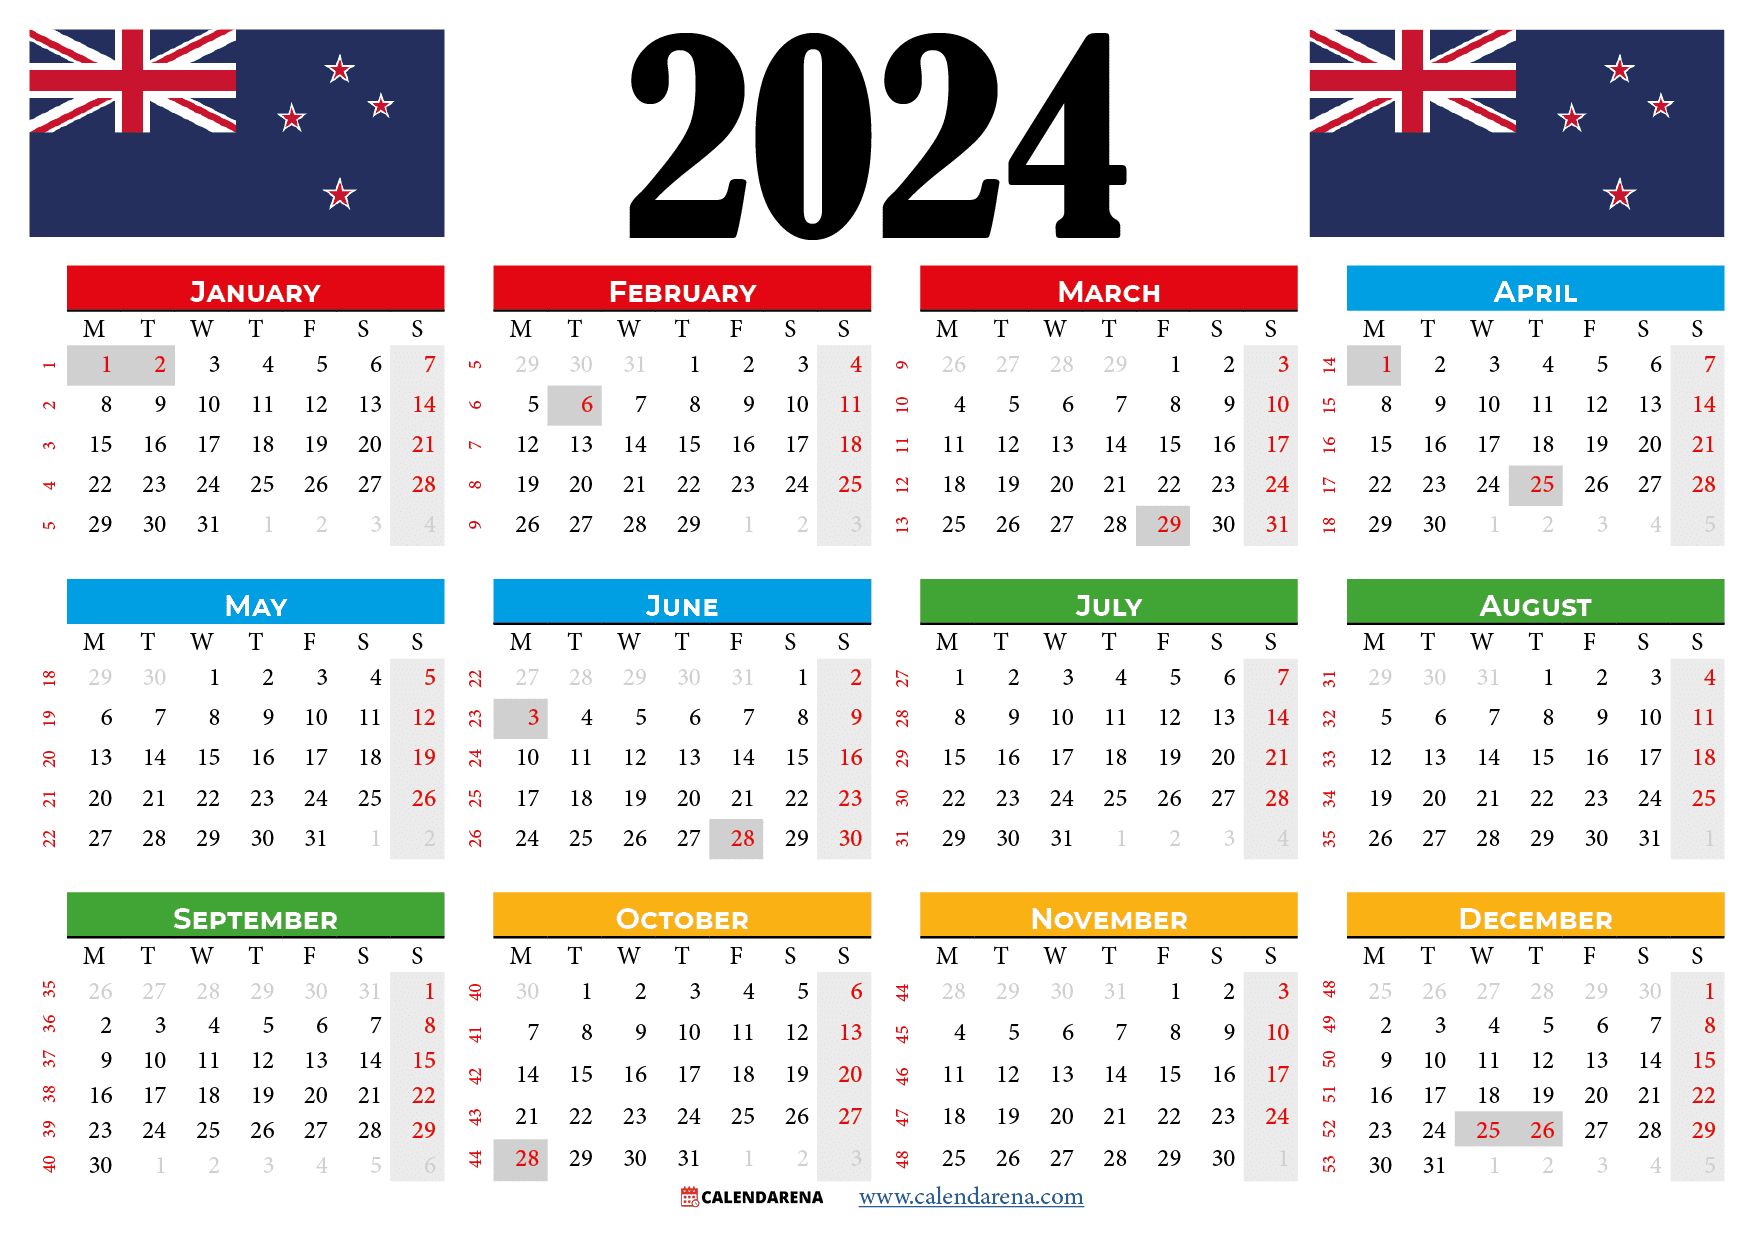 Calendar 2024 Nz With Holidays And Festivals within Free Printable Calendar 2024 Nz